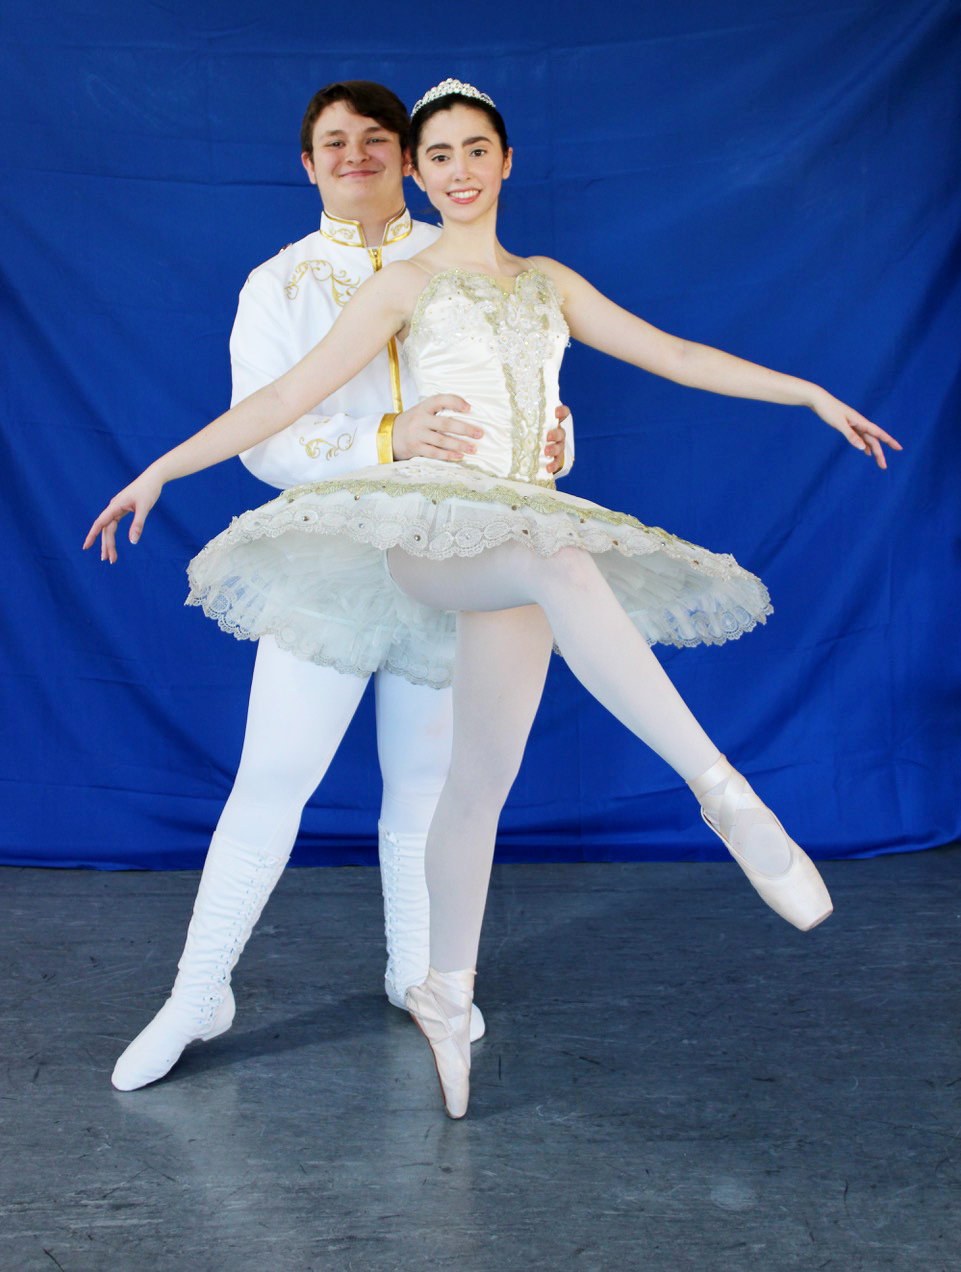 Josephine Amato and Tyler Powley will dance the roles of Princess Aurora and Prince Désiré in a performance of ‘The Sleeping Beauty’ on Sunday, May 15 at 2 p.m.